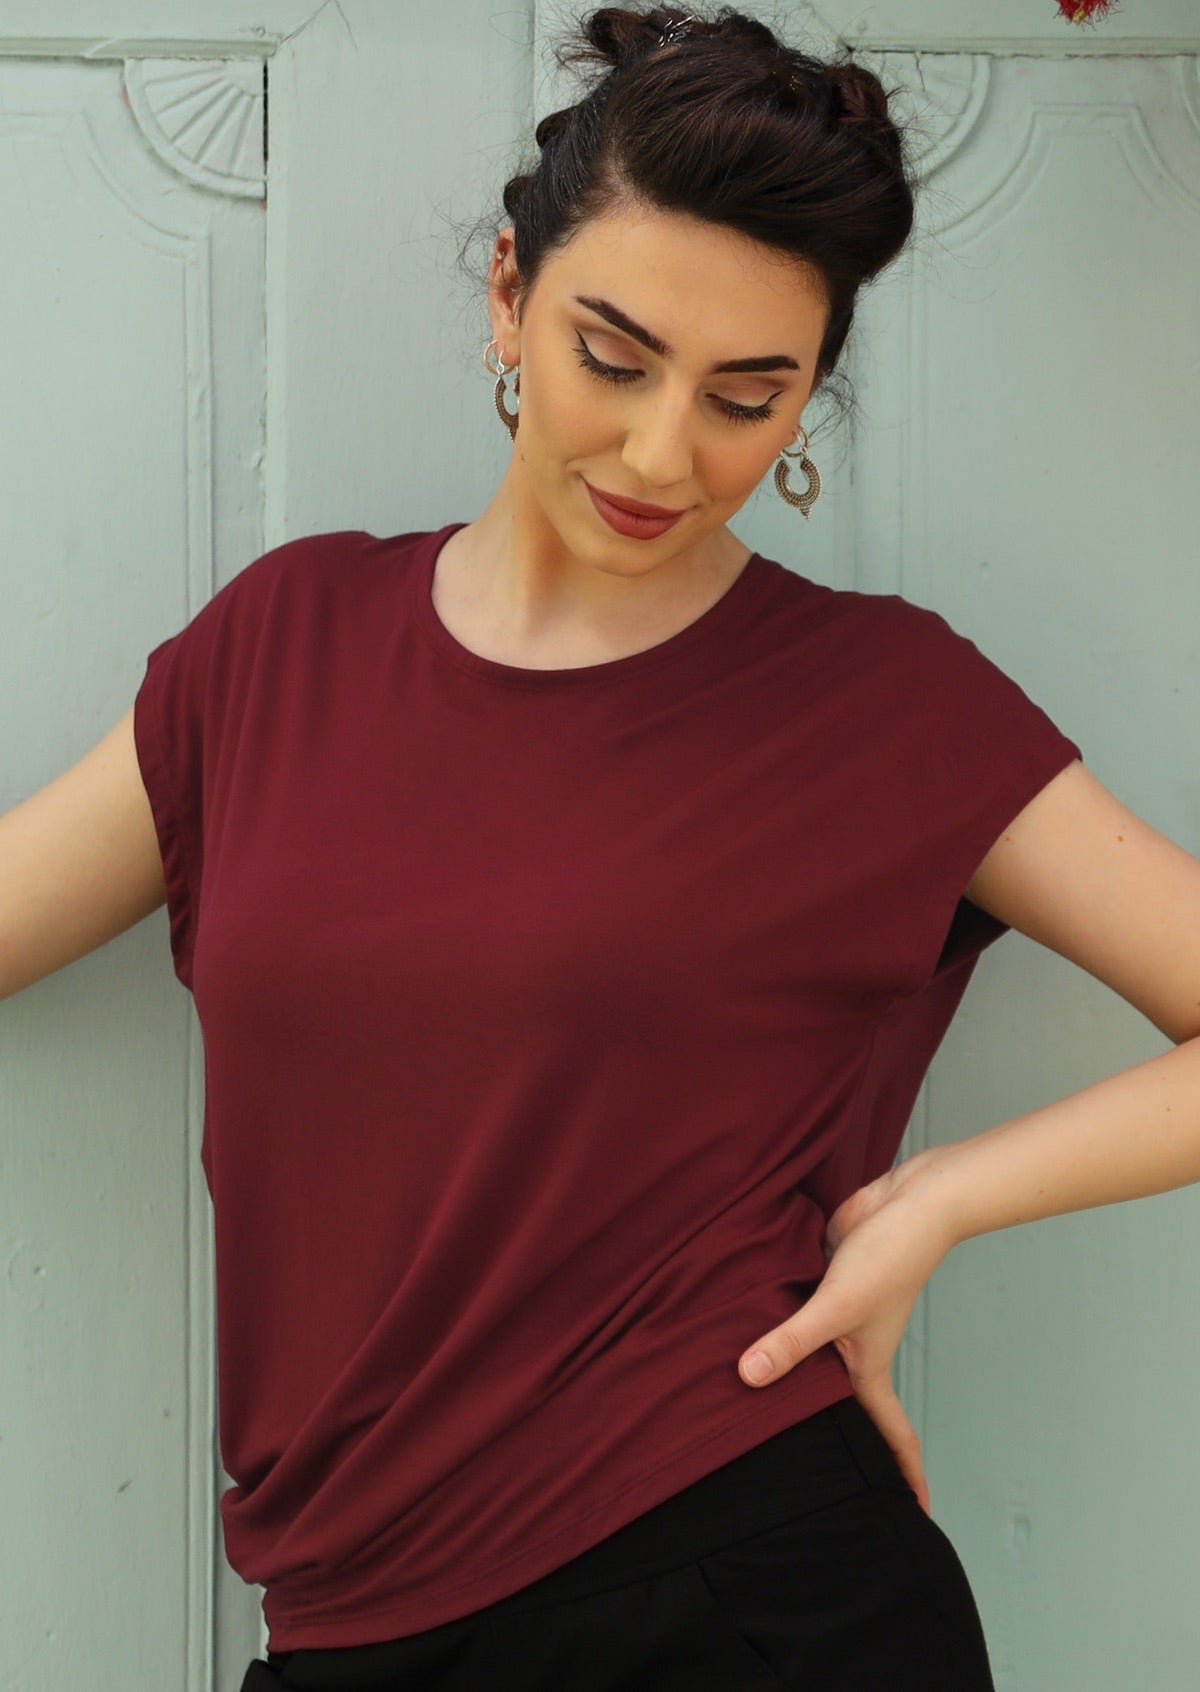 Woman wearing maroon soft stretch rayon women's top with black pants